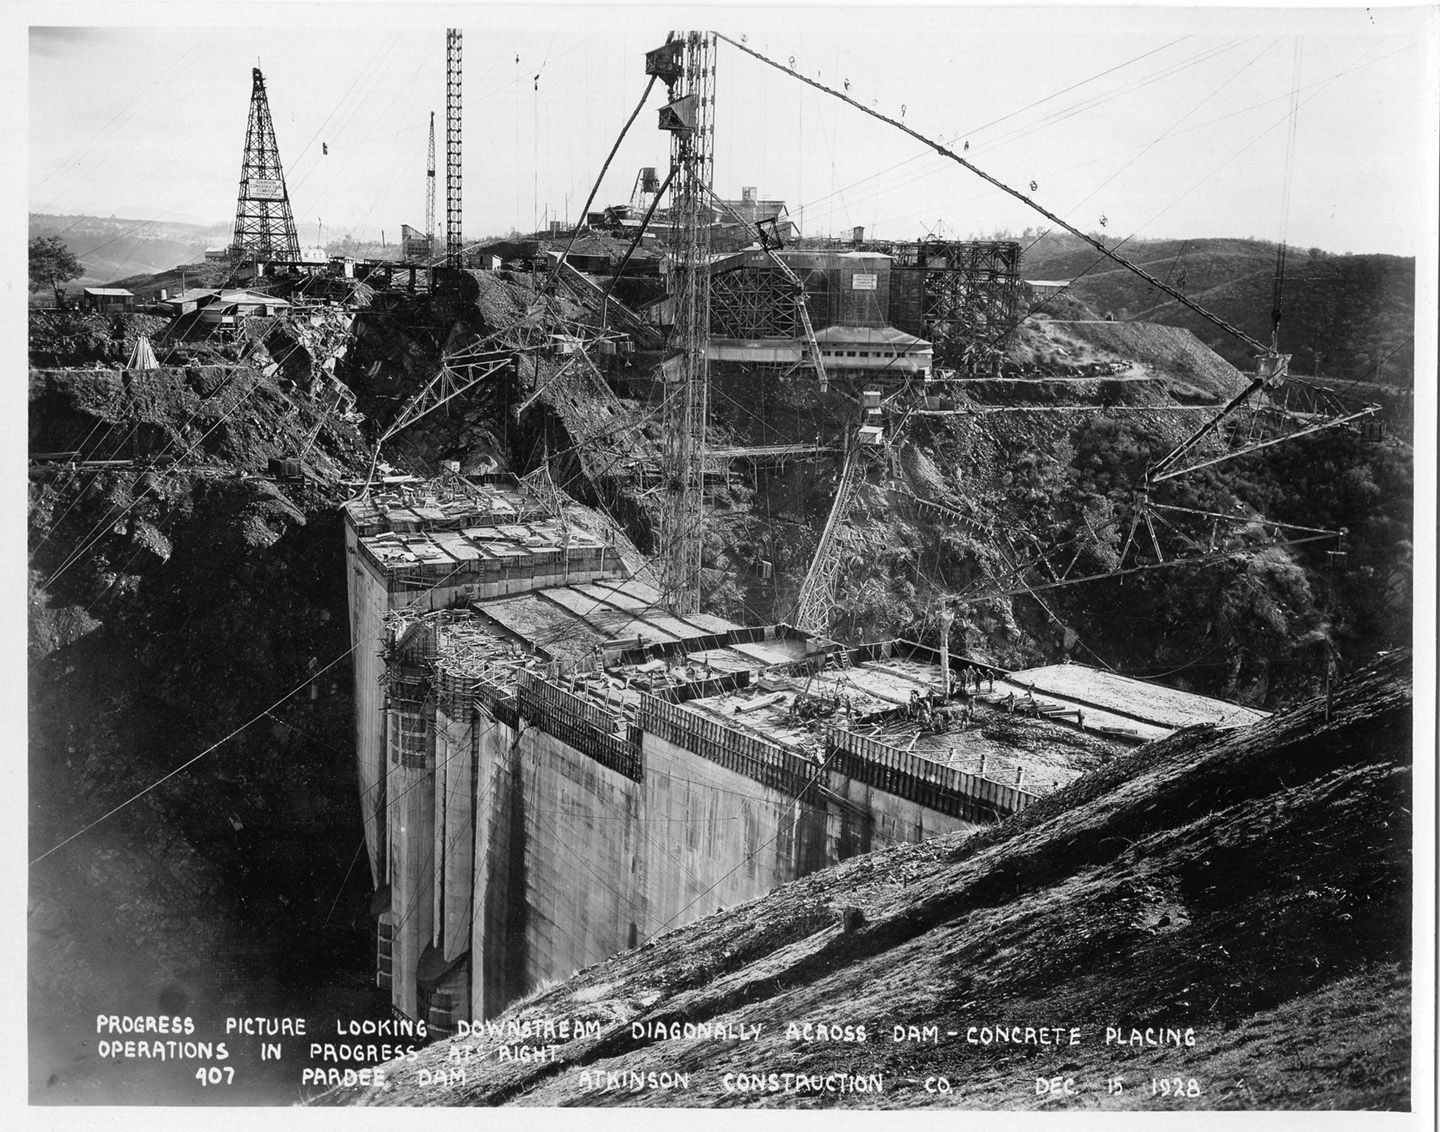 Progress picture looking downstream diagonally across dam - concrete placing operations in progress at right. (December 1928)